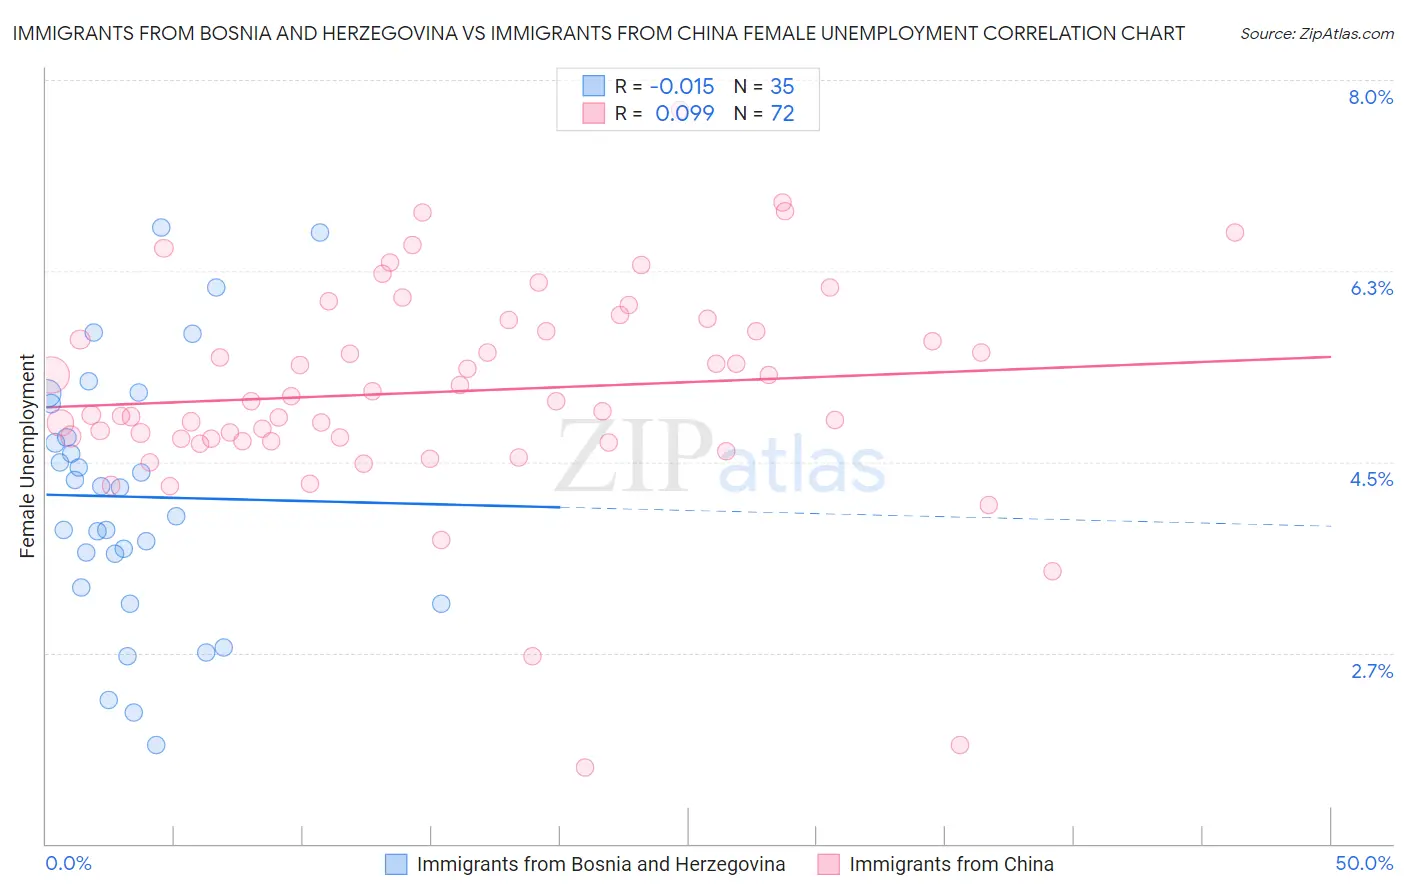 Immigrants from Bosnia and Herzegovina vs Immigrants from China Female Unemployment